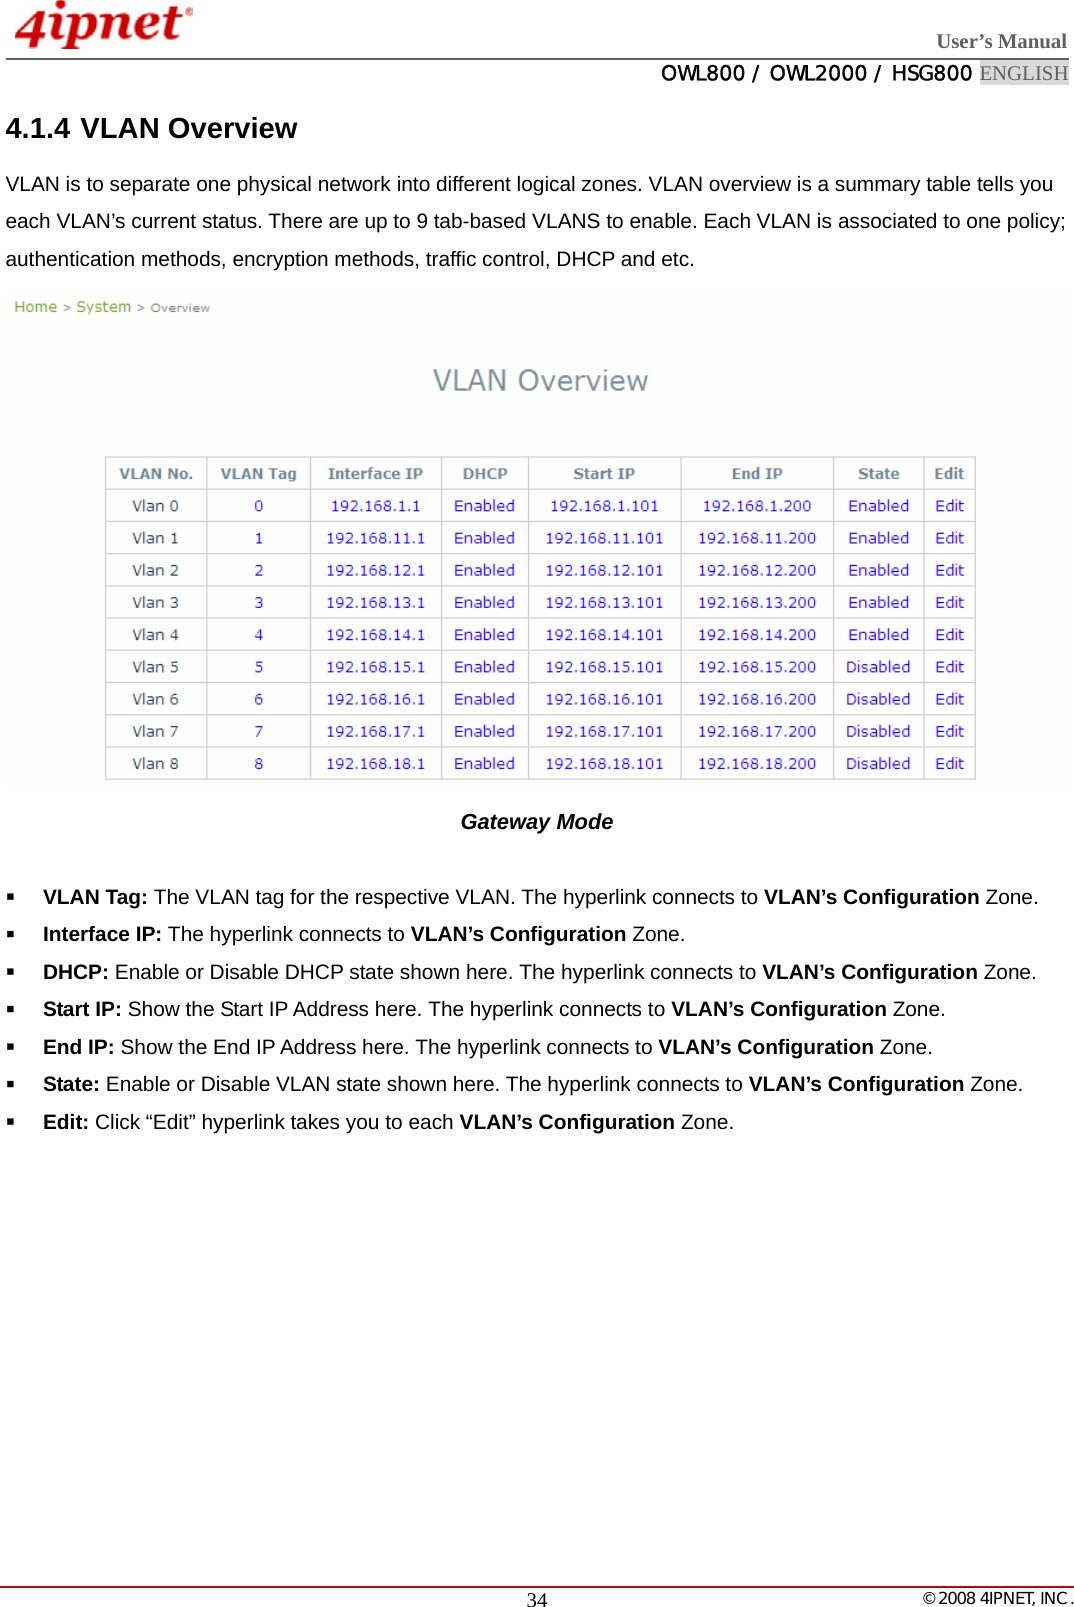  User’s Manual  OWL800 / OWL2000 / HSG800 ENGLISH   © 2008 4IPNET, INC.  344.1.4 VLAN Overview VLAN is to separate one physical network into different logical zones. VLAN overview is a summary table tells you each VLAN’s current status. There are up to 9 tab-based VLANS to enable. Each VLAN is associated to one policy; authentication methods, encryption methods, traffic control, DHCP and etc.    Gateway Mode   VLAN Tag: The VLAN tag for the respective VLAN. The hyperlink connects to VLAN’s Configuration Zone.  Interface IP: The hyperlink connects to VLAN’s Configuration Zone.  DHCP: Enable or Disable DHCP state shown here. The hyperlink connects to VLAN’s Configuration Zone.   Start IP: Show the Start IP Address here. The hyperlink connects to VLAN’s Configuration Zone.  End IP: Show the End IP Address here. The hyperlink connects to VLAN’s Configuration Zone.  State: Enable or Disable VLAN state shown here. The hyperlink connects to VLAN’s Configuration Zone.    Edit: Click “Edit” hyperlink takes you to each VLAN’s Configuration Zone.   